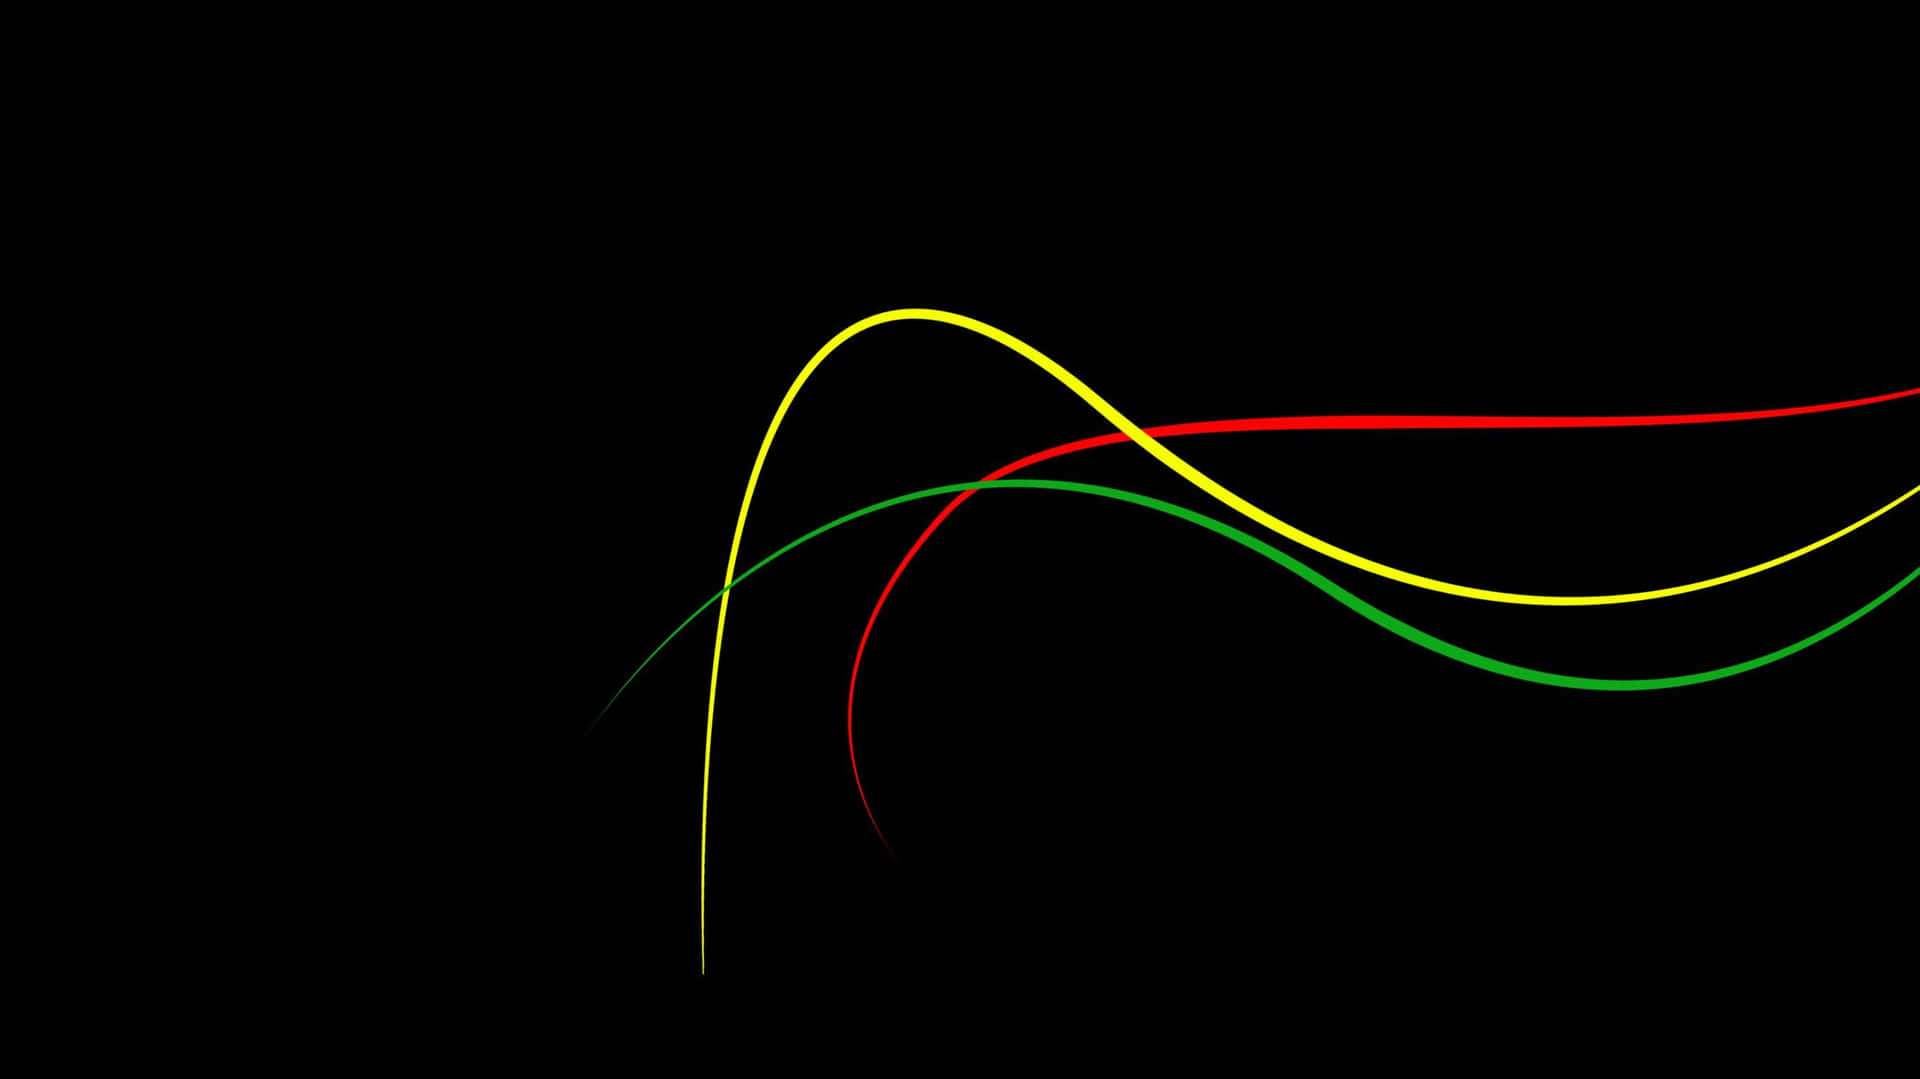 A Black Background With A Red, Green, And Blue Line Wallpaper